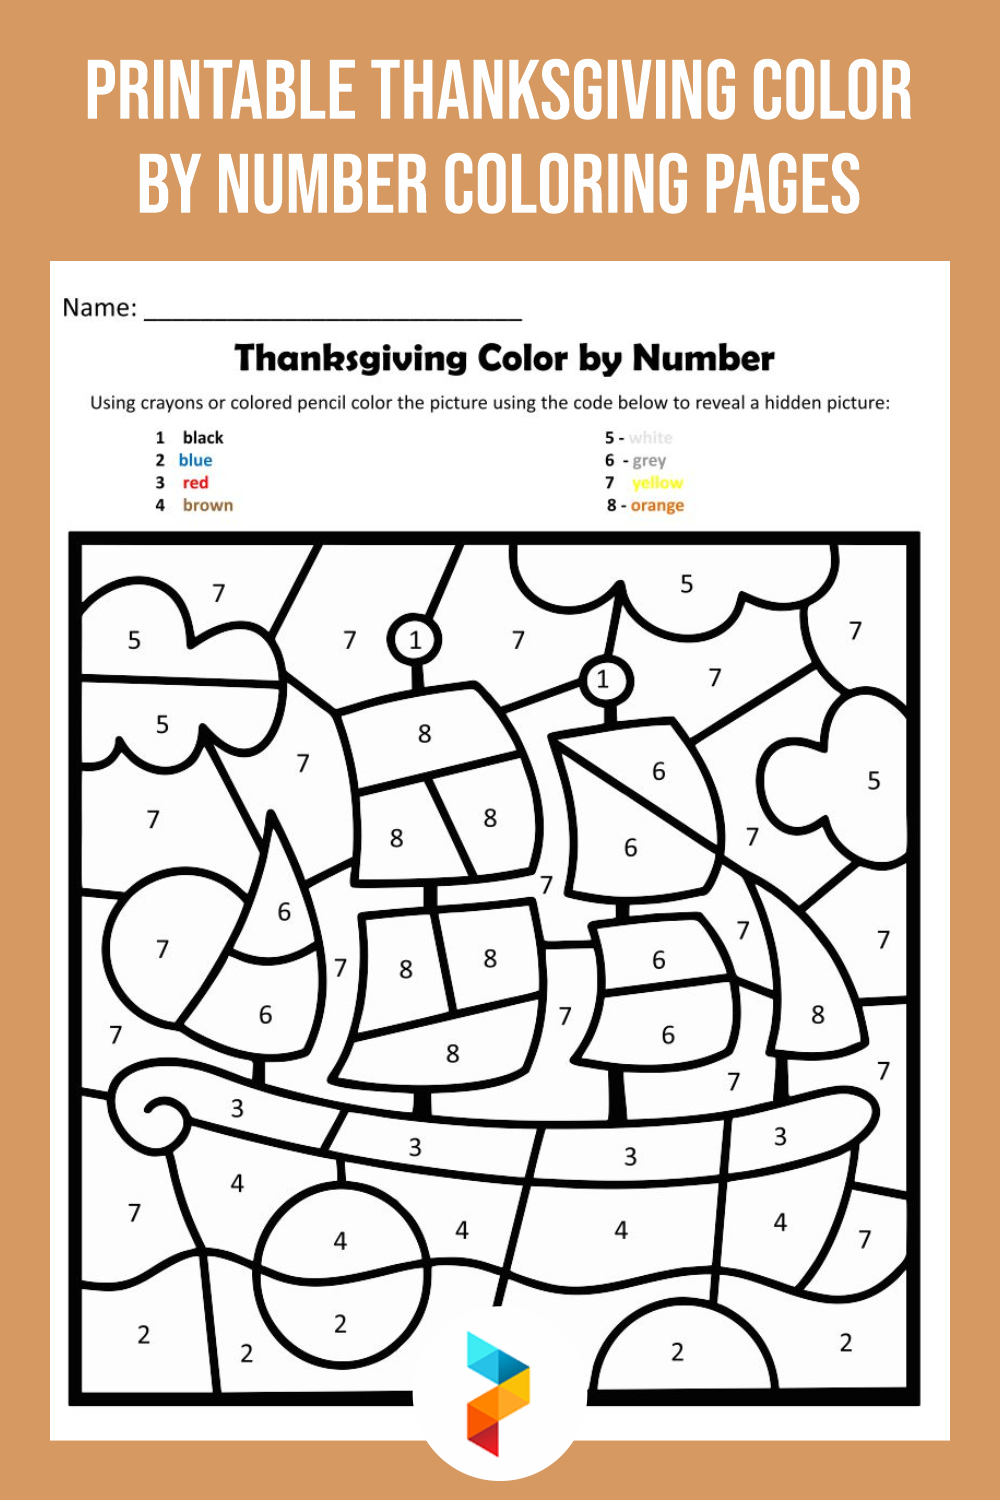 Printable Thanksgiving Color By Number Coloring Pages